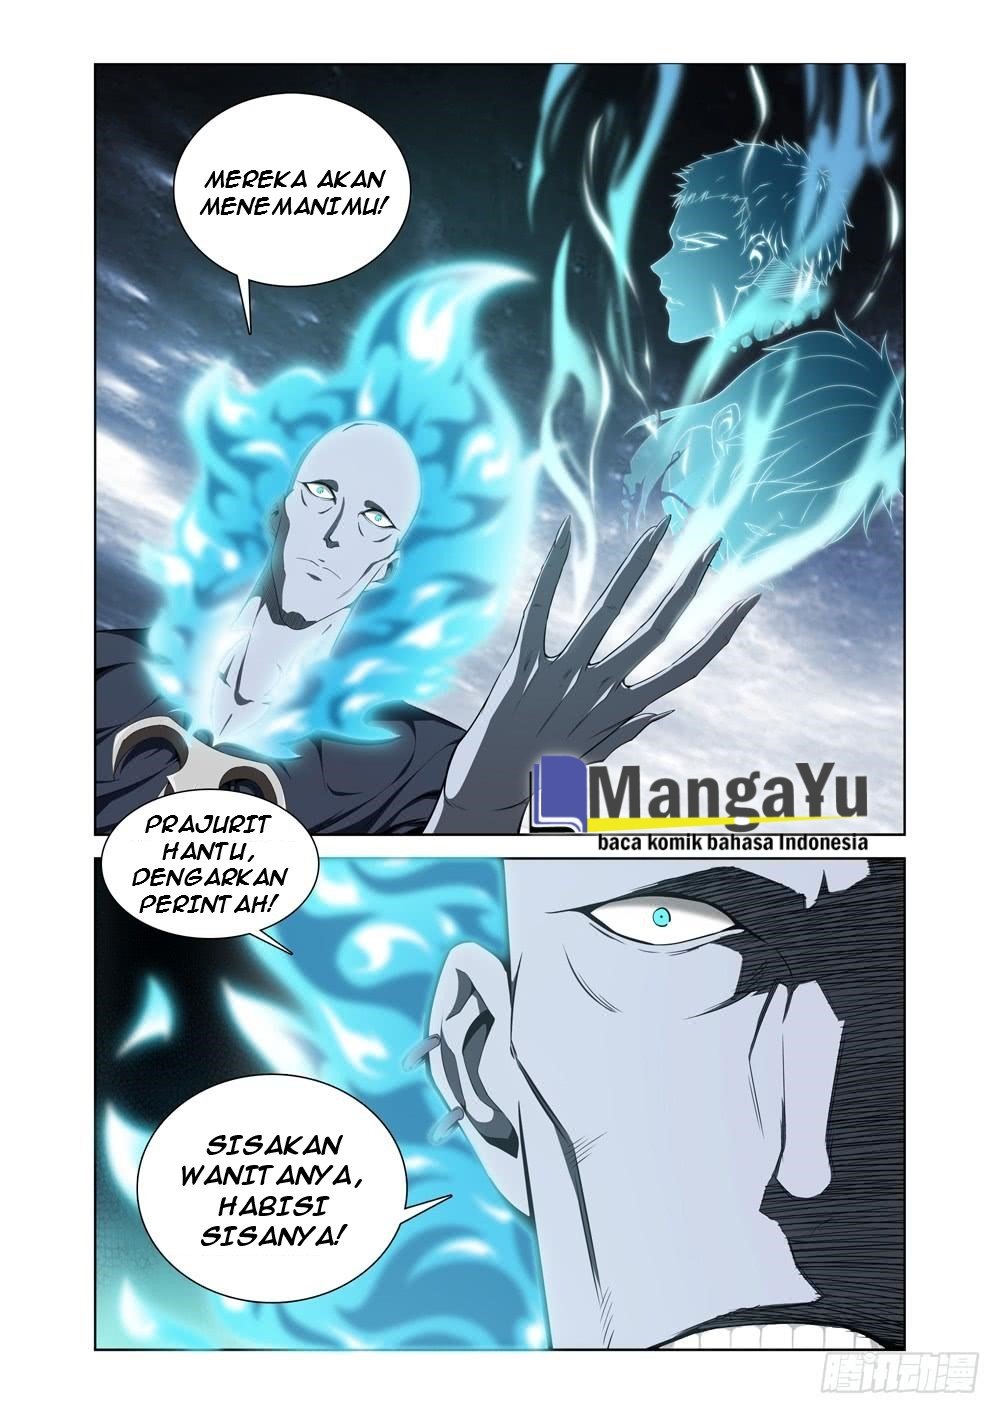 Strongest System Yan Luo Chapter 10